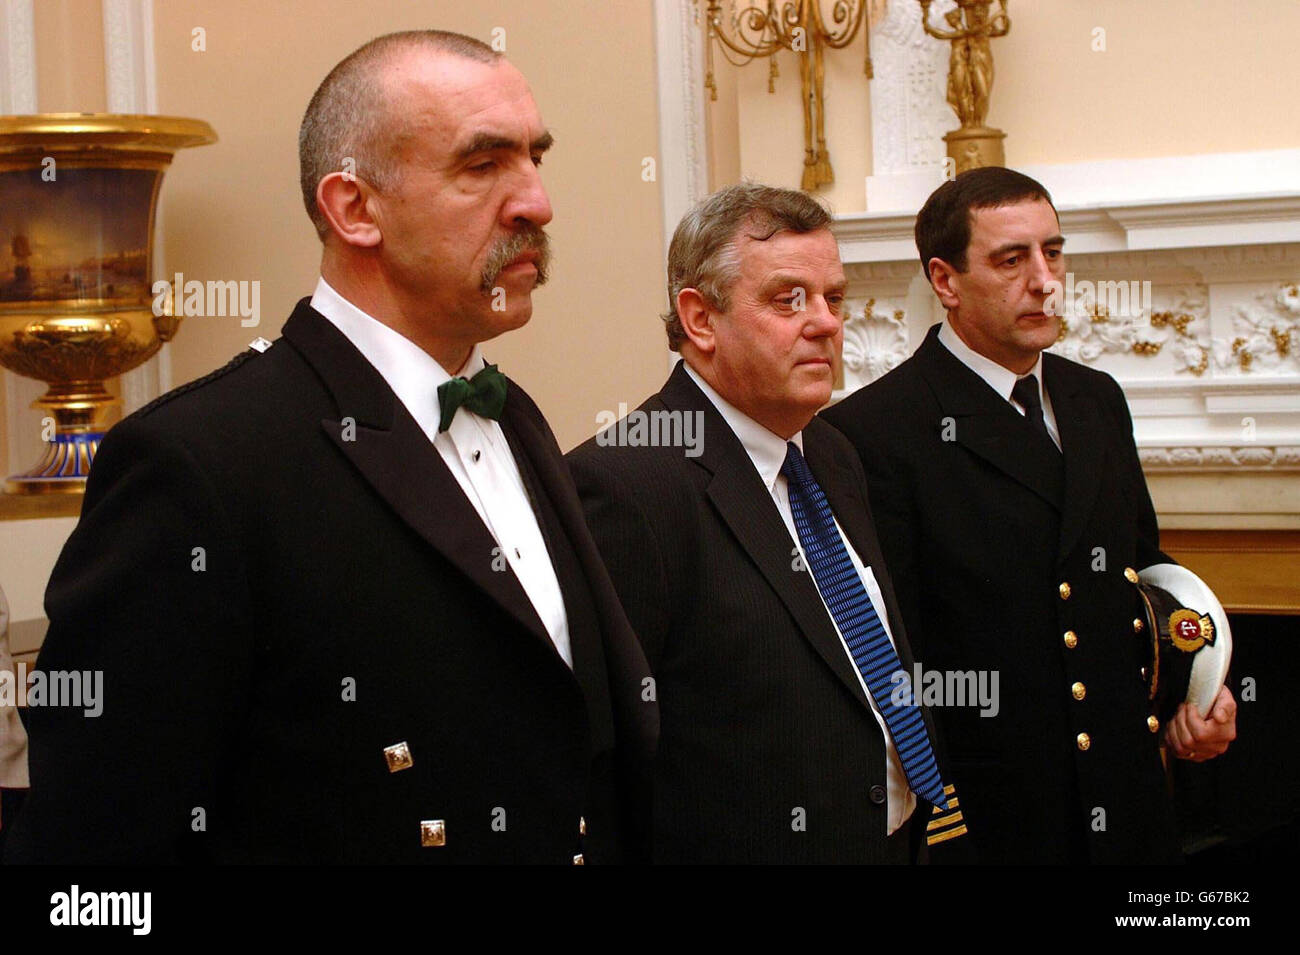 Raymond John Wallace from Devon (L), Malcolm Dailey from stockton (C) and Alexander Donald Macleod from Amble, Northumberland, waiting to be decorated by the Russian Ambassador Grigory Mavrin at the Russian Embassy in London, *..for the salvage operation off the ill-fated Russian submarine Kursk in August 2002. The Russian Kursk sank in the Barents Sea on August 12, 2000, with the loss of all 118 crew after two explosions tore open its hull while it was submerged. Stock Photo